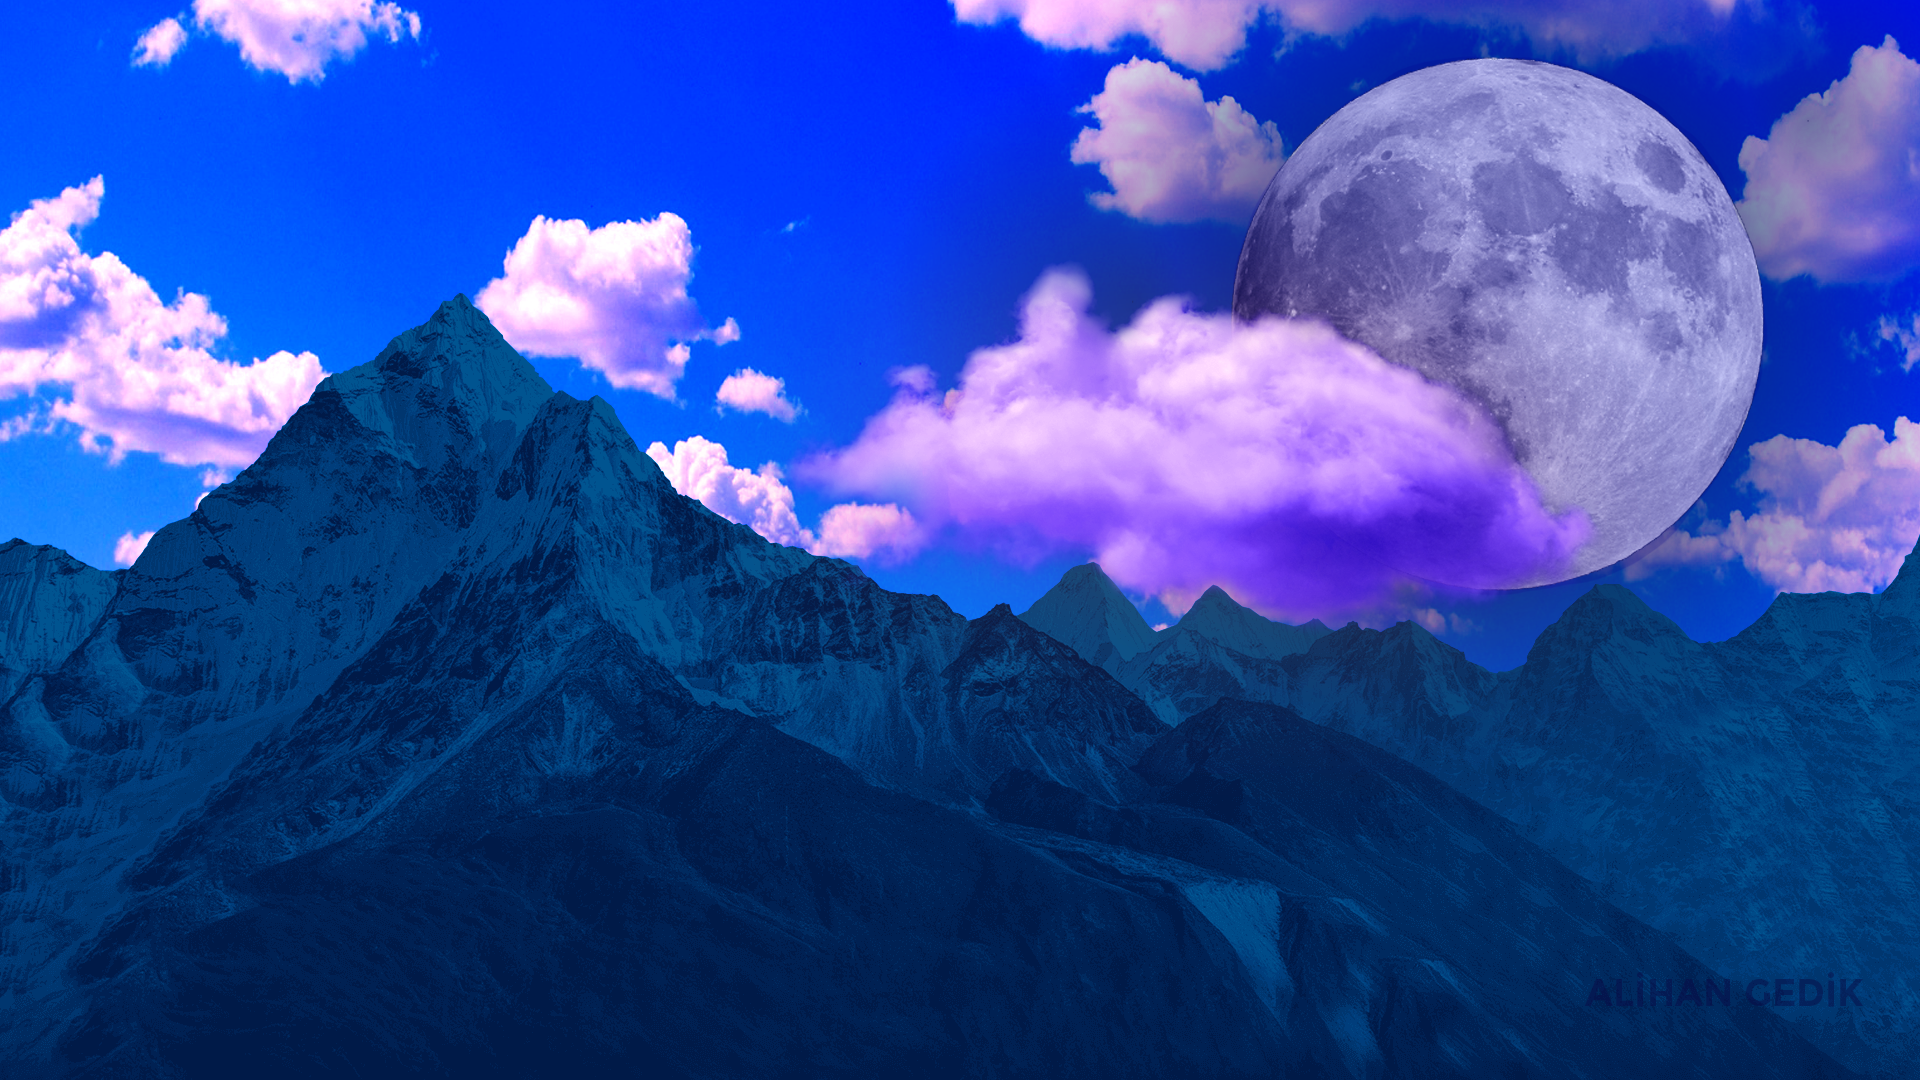 General 1920x1080 night digital art nature Moon mountains clouds